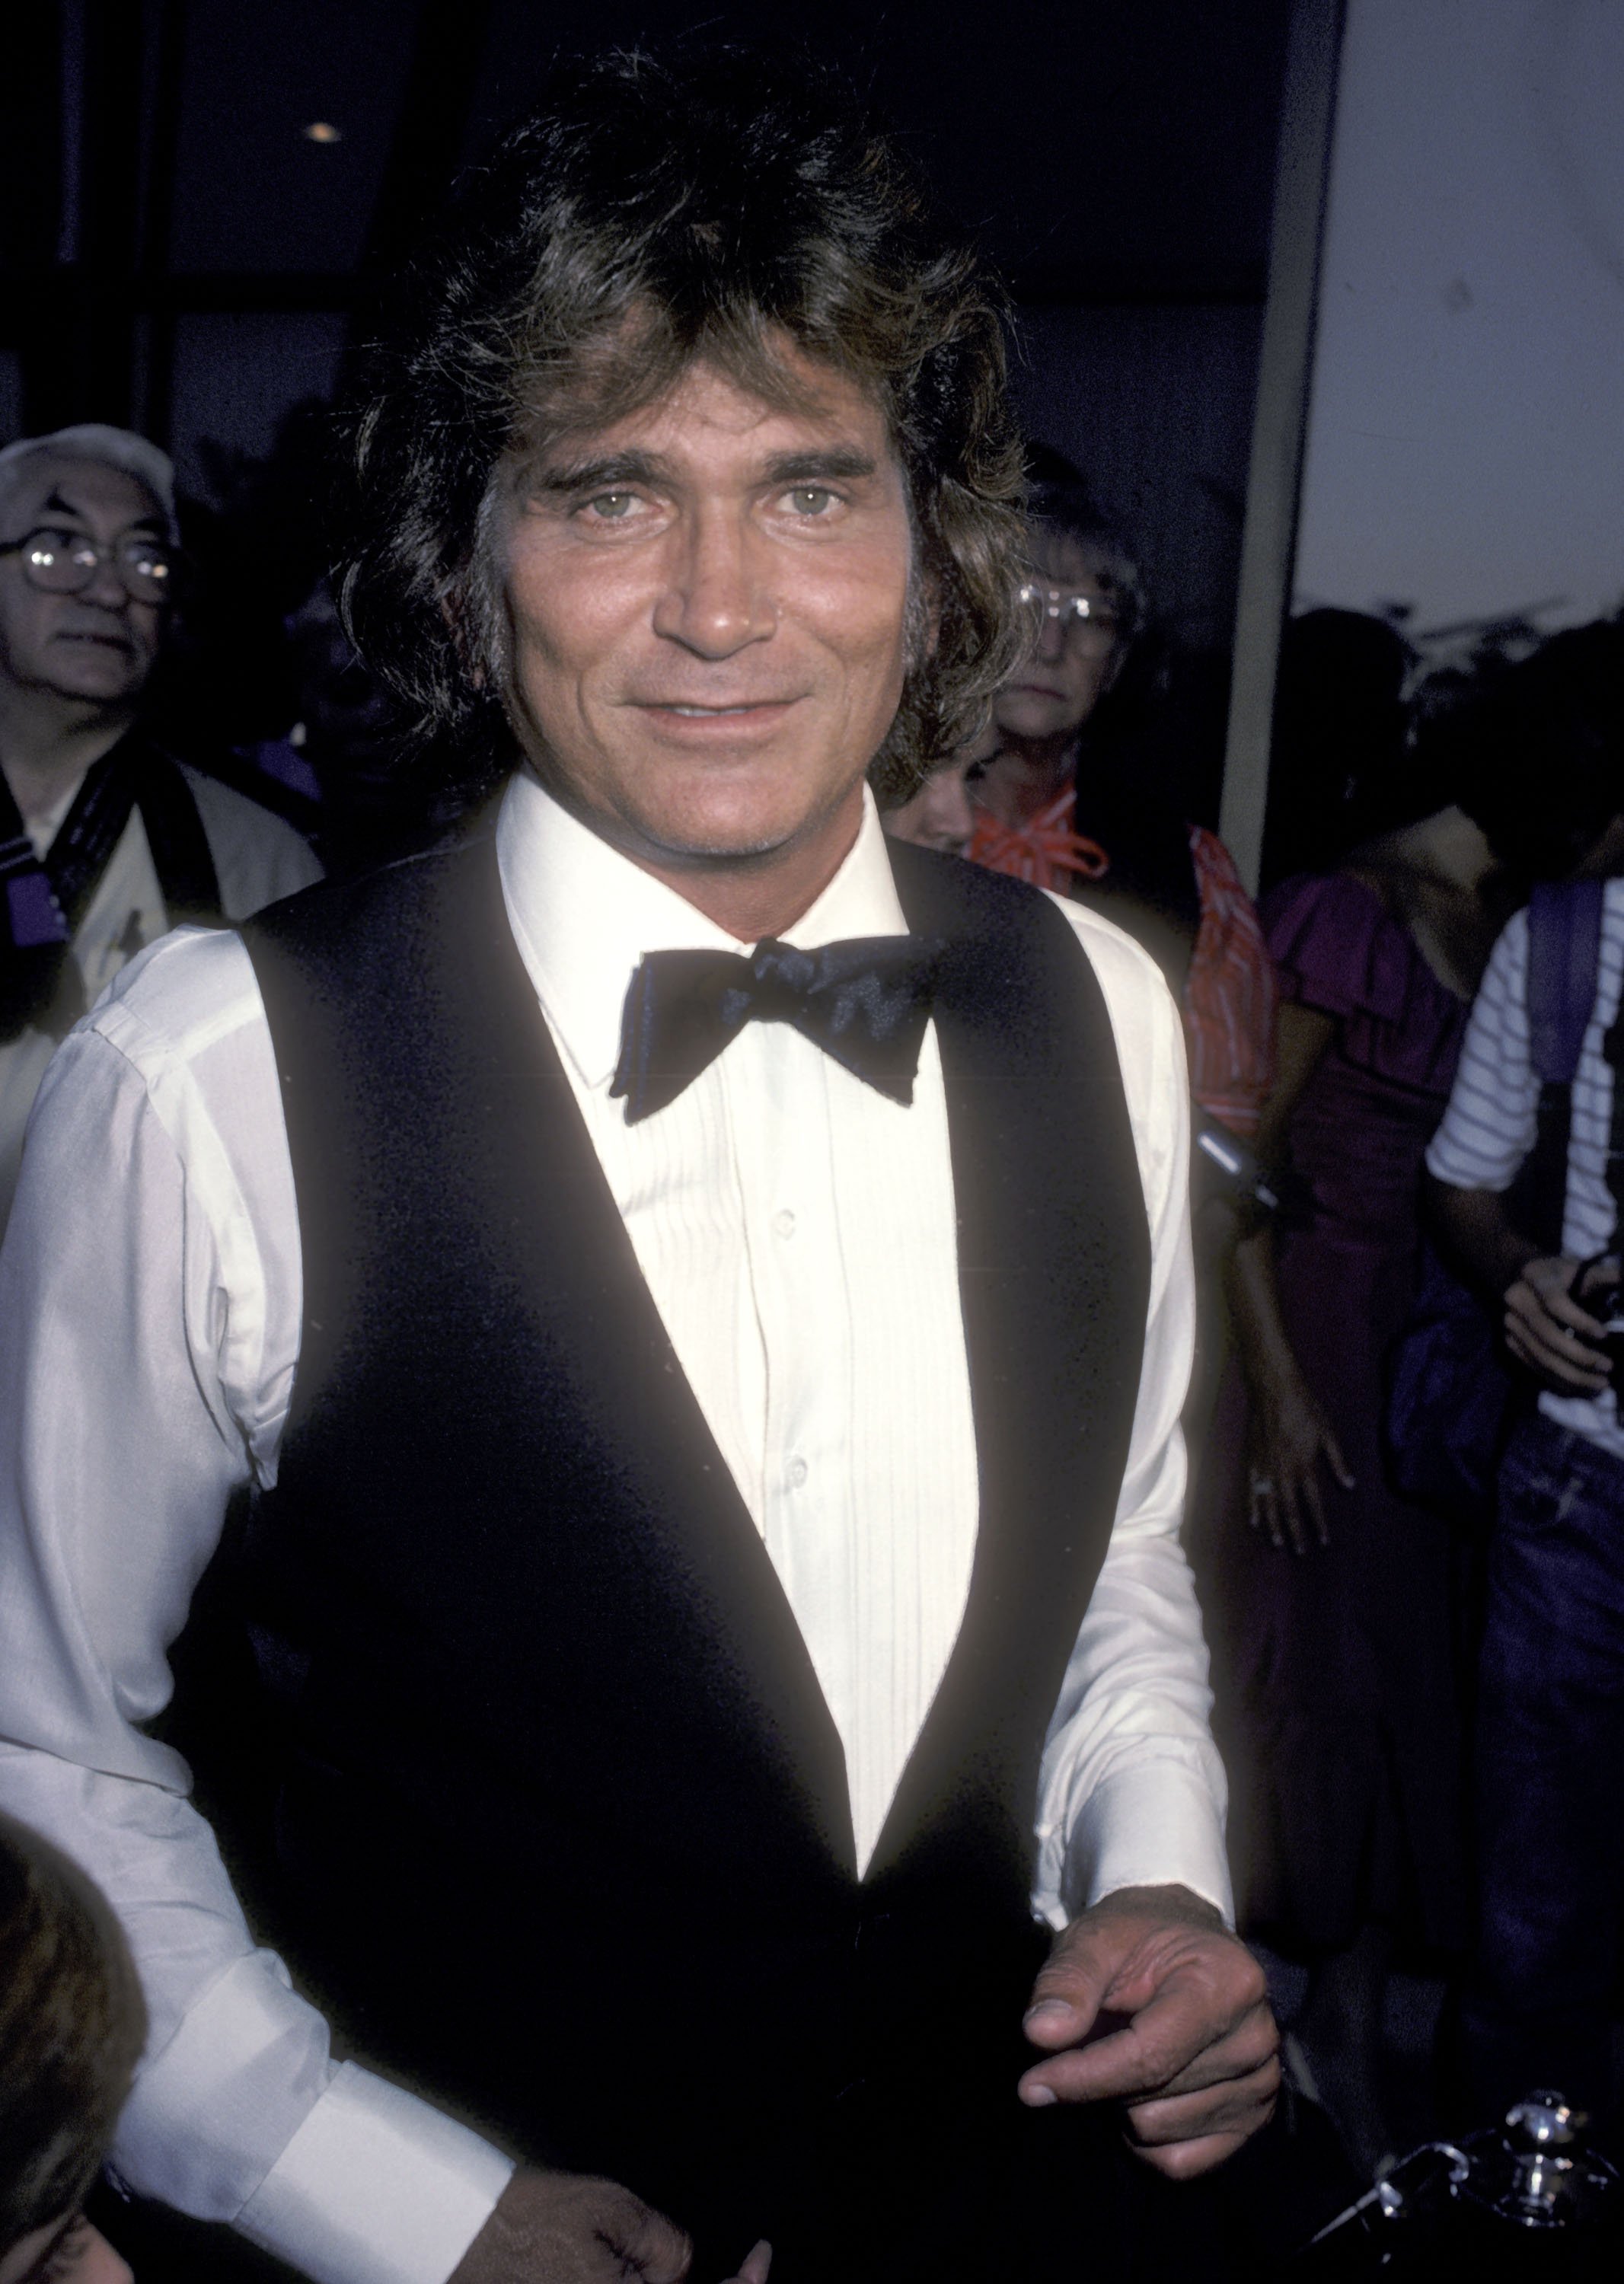 Michael Landon attends the "Sam's Son" Beverly Hills Premiere on August 15, 1984, at the Academy Theatre in Beverly Hills, California. | Source: Getty Images